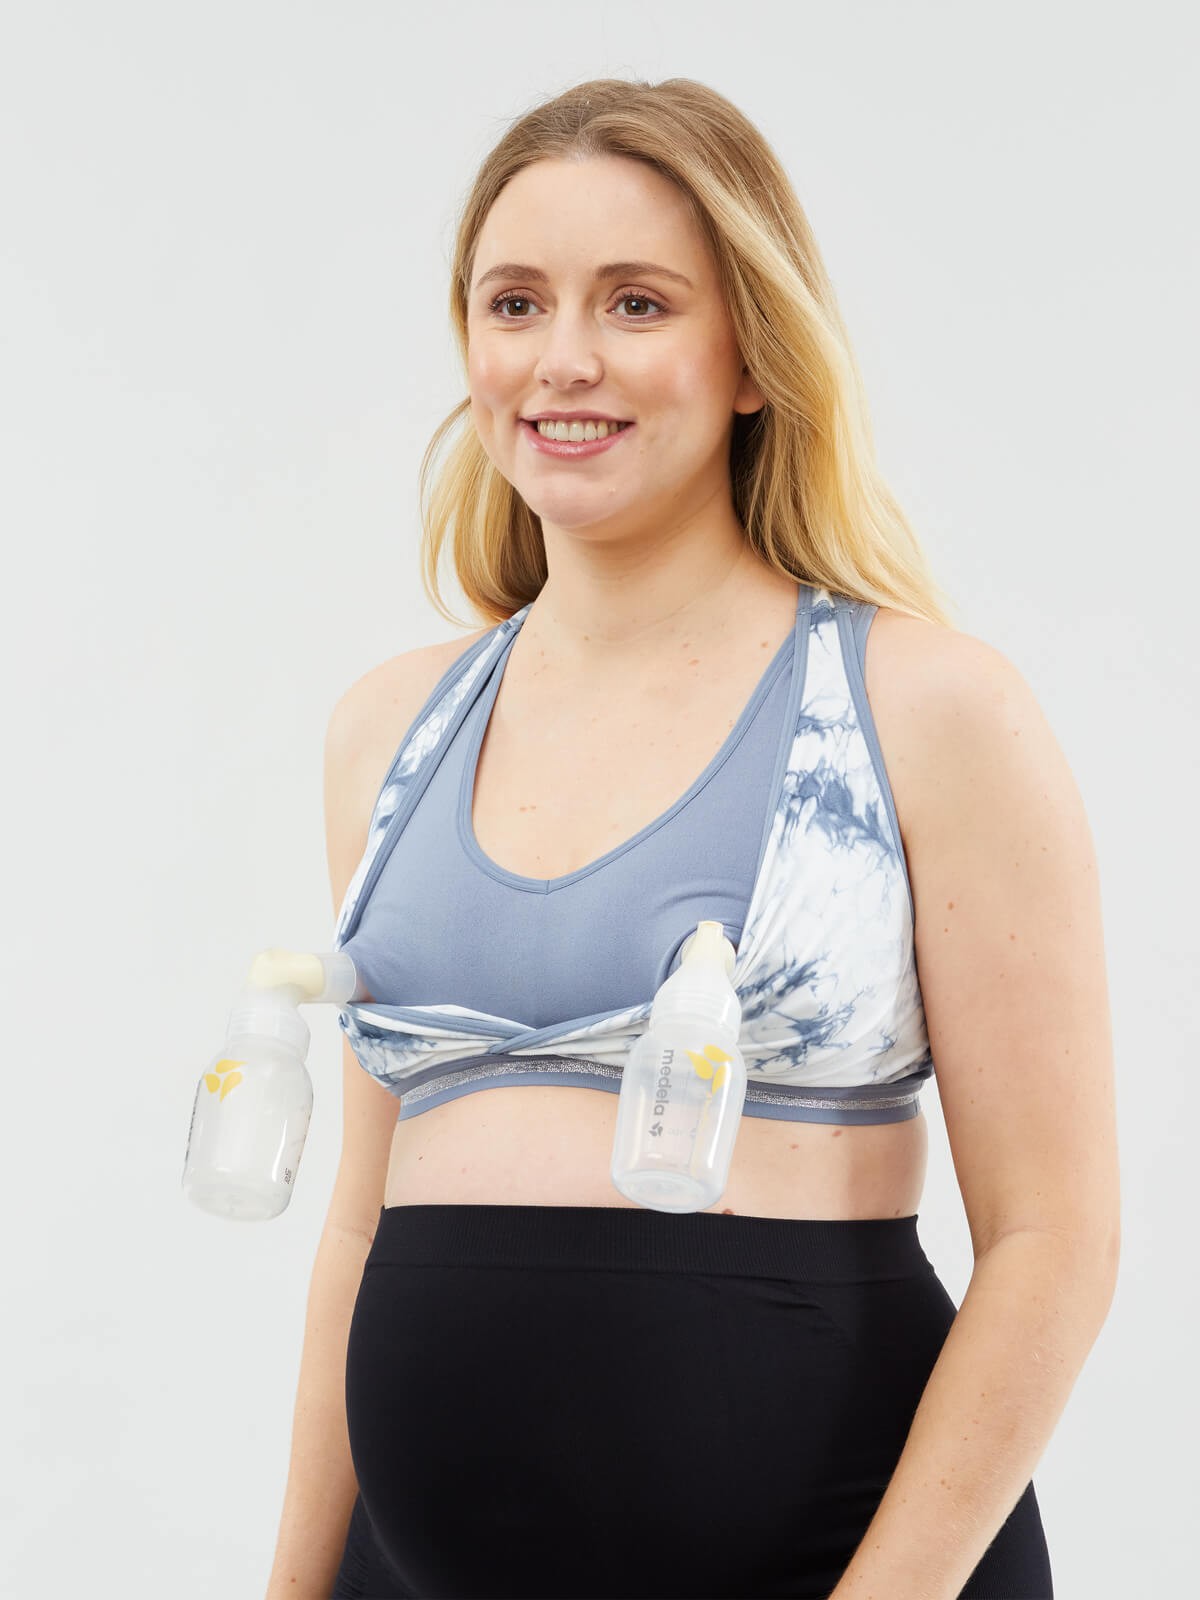 MOMANDA Cotton Hands Free Pumping Longline Bra Set For Nursing,  Breastfeeding, And Sleep Wireless Crossover Maternity Lingerie With Soft  XSL Fabric 230927 From Bong08, $16.5